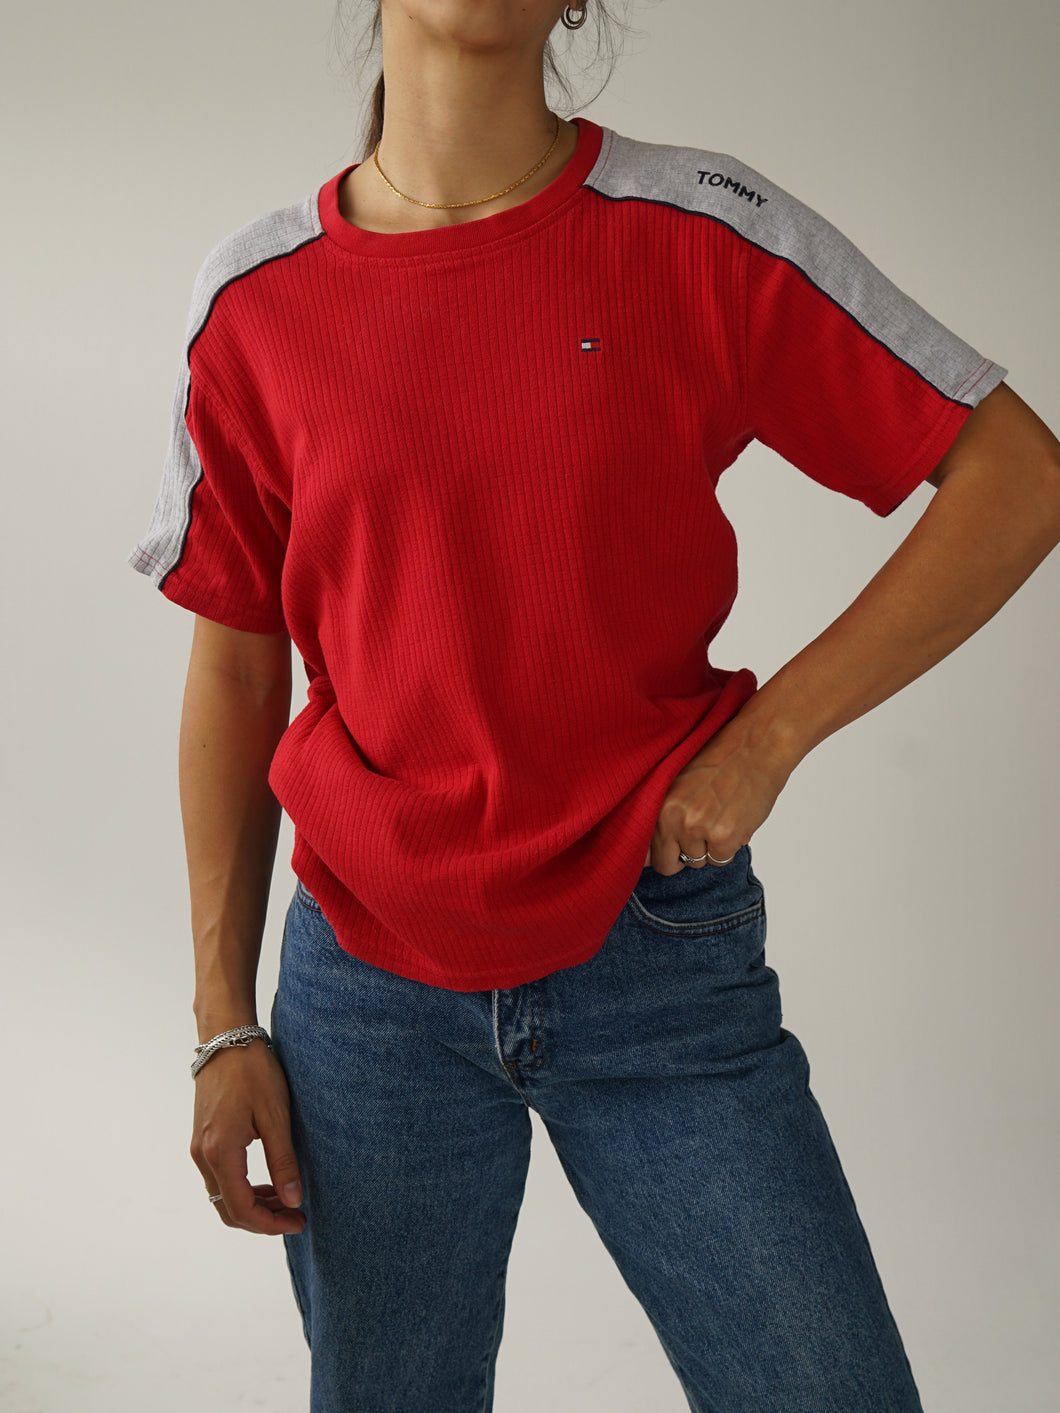 Tommy Hilfiger red t shirt